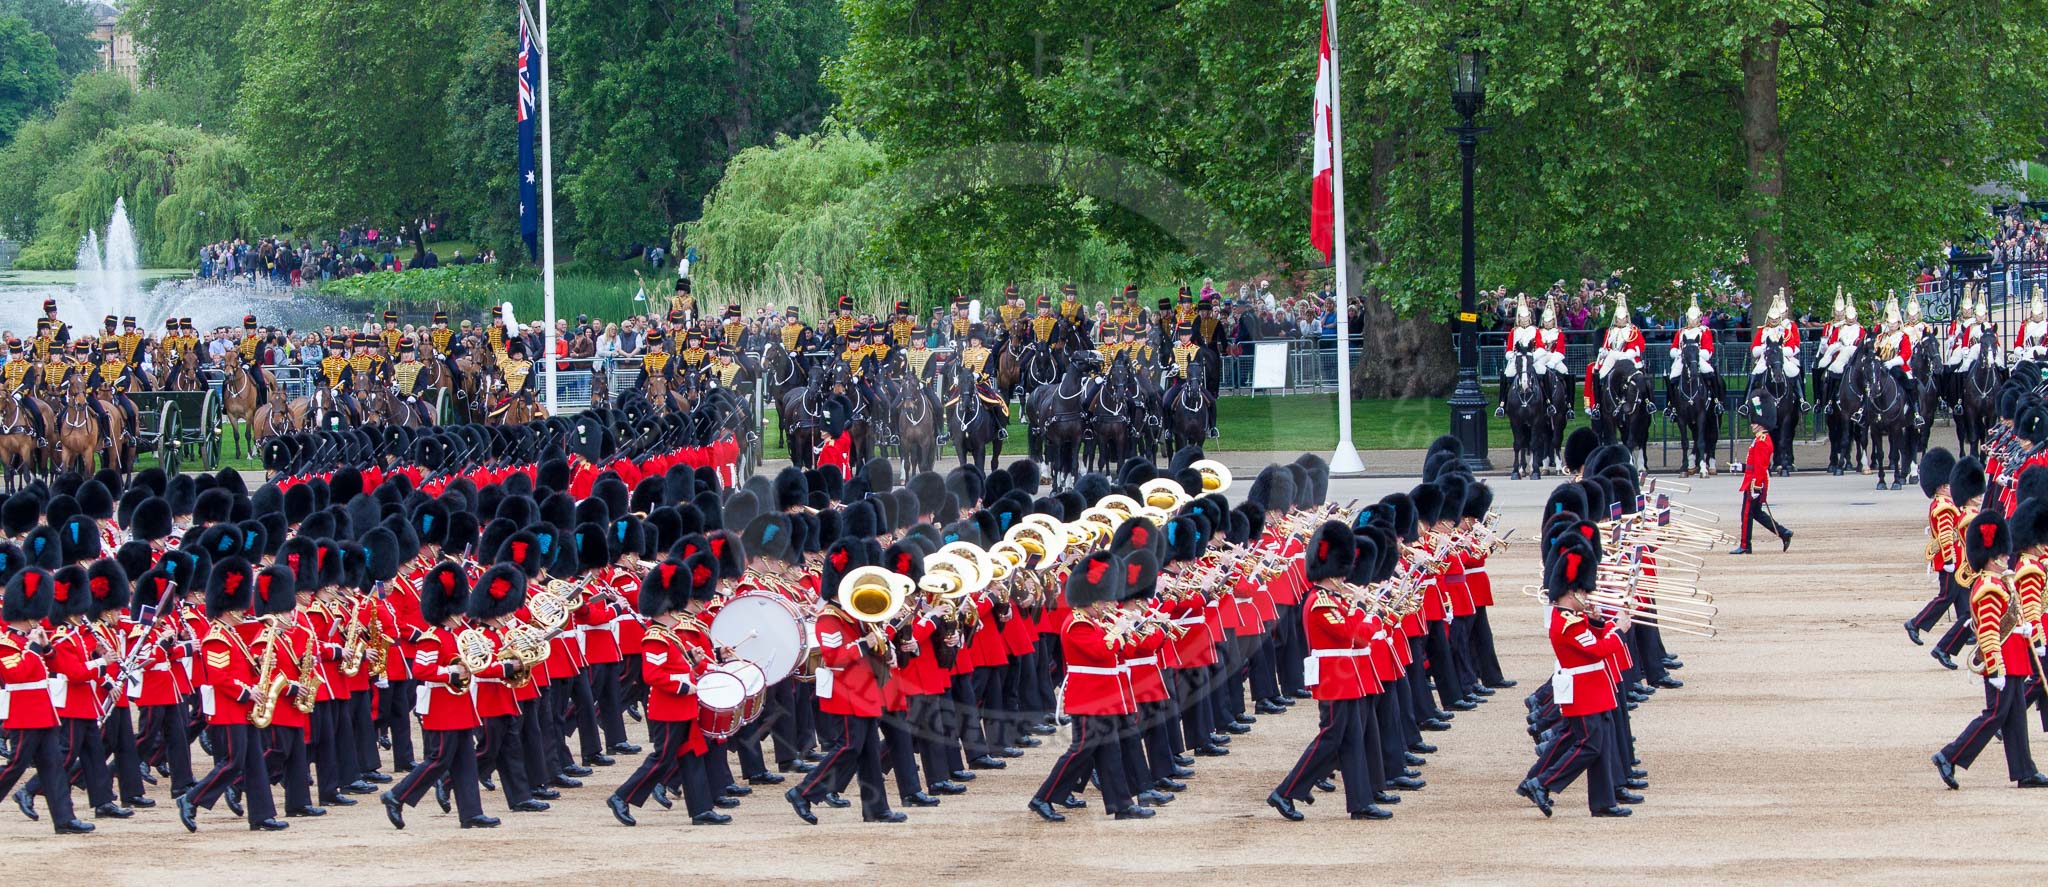 Major General's Review 2013: The Massed Bands, led by the five Drum Majors, during the March Past..
Horse Guards Parade, Westminster,
London SW1,

United Kingdom,
on 01 June 2013 at 11:30, image #459